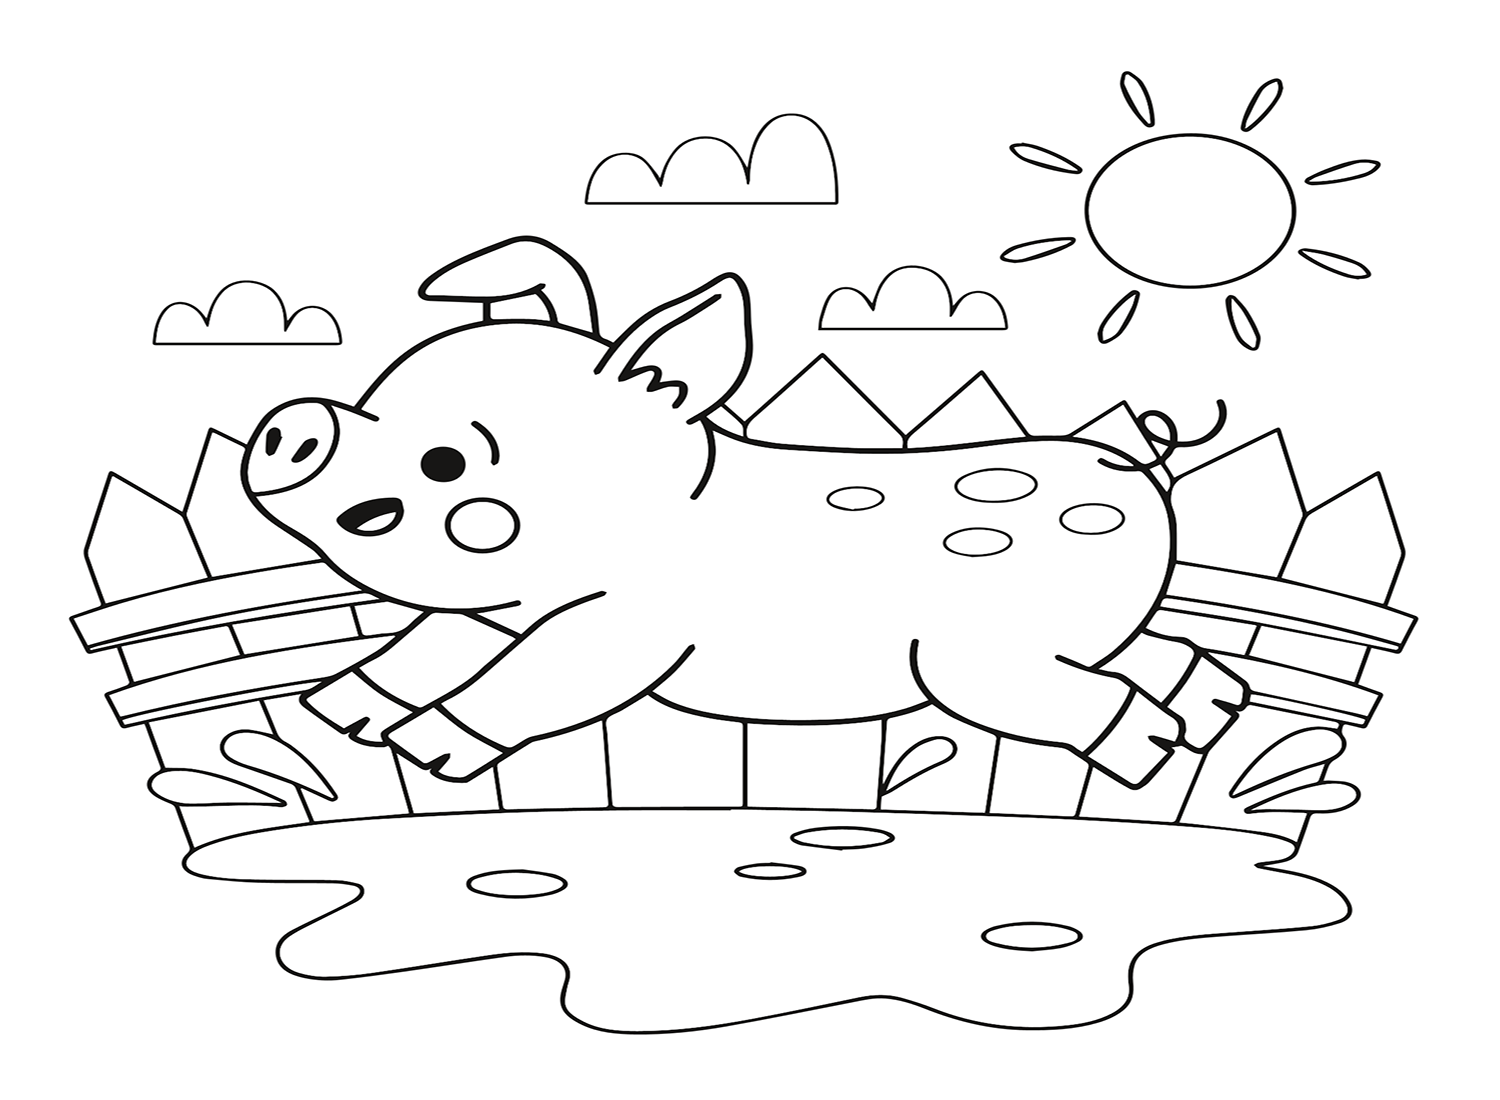 Kawaii Animal Images Coloring Pages